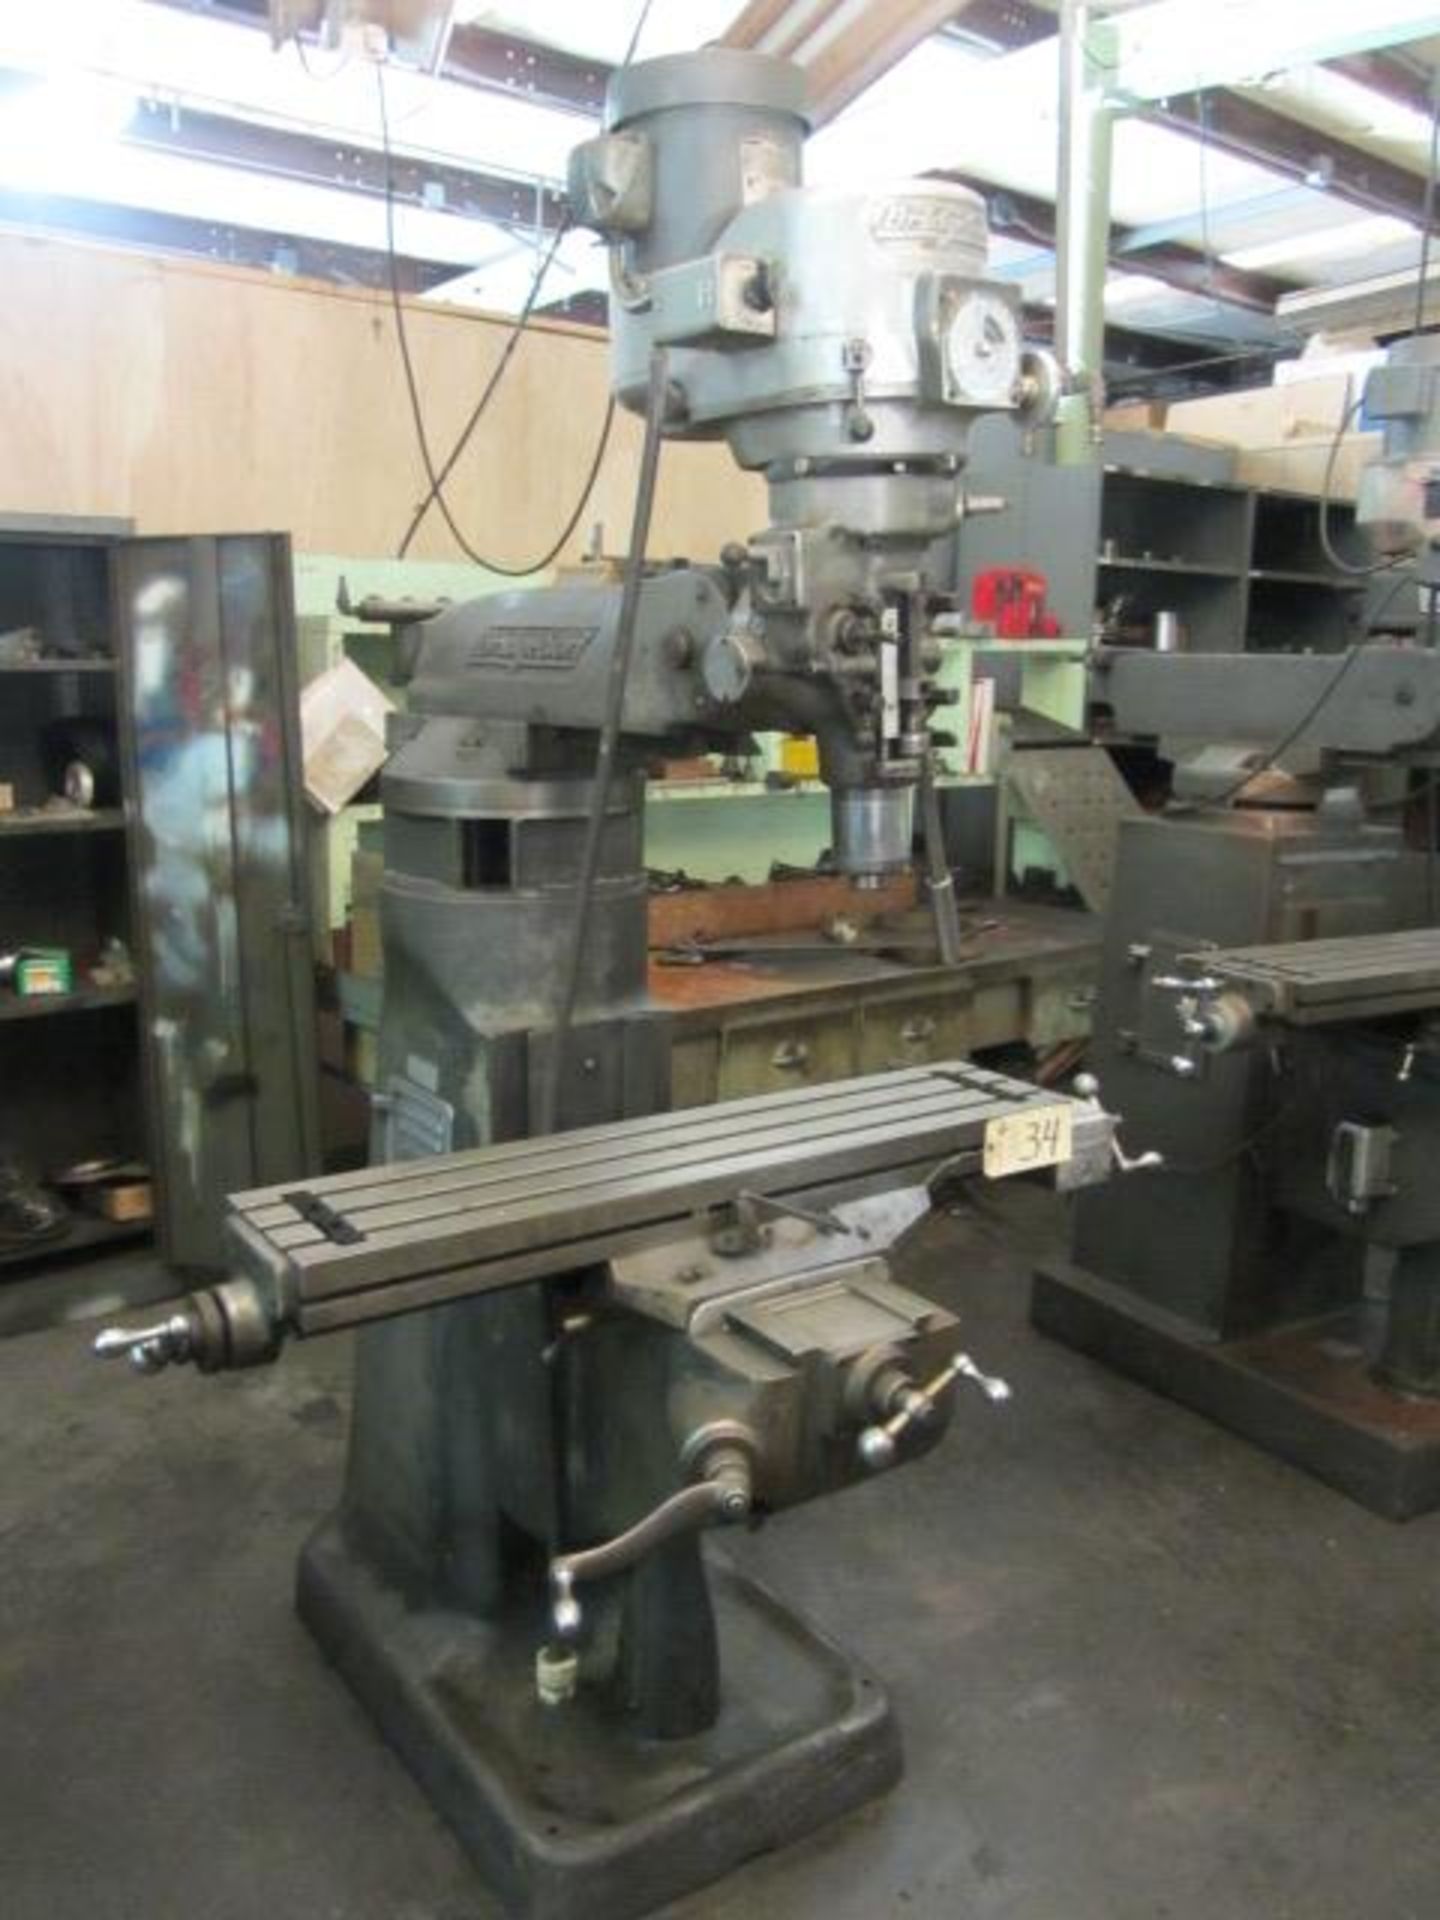 Bridgeport Vertical Milling Machine with R-8 Variable Spindle Speeds, 9'' x 42'' Table, sn:98685 - Image 2 of 4